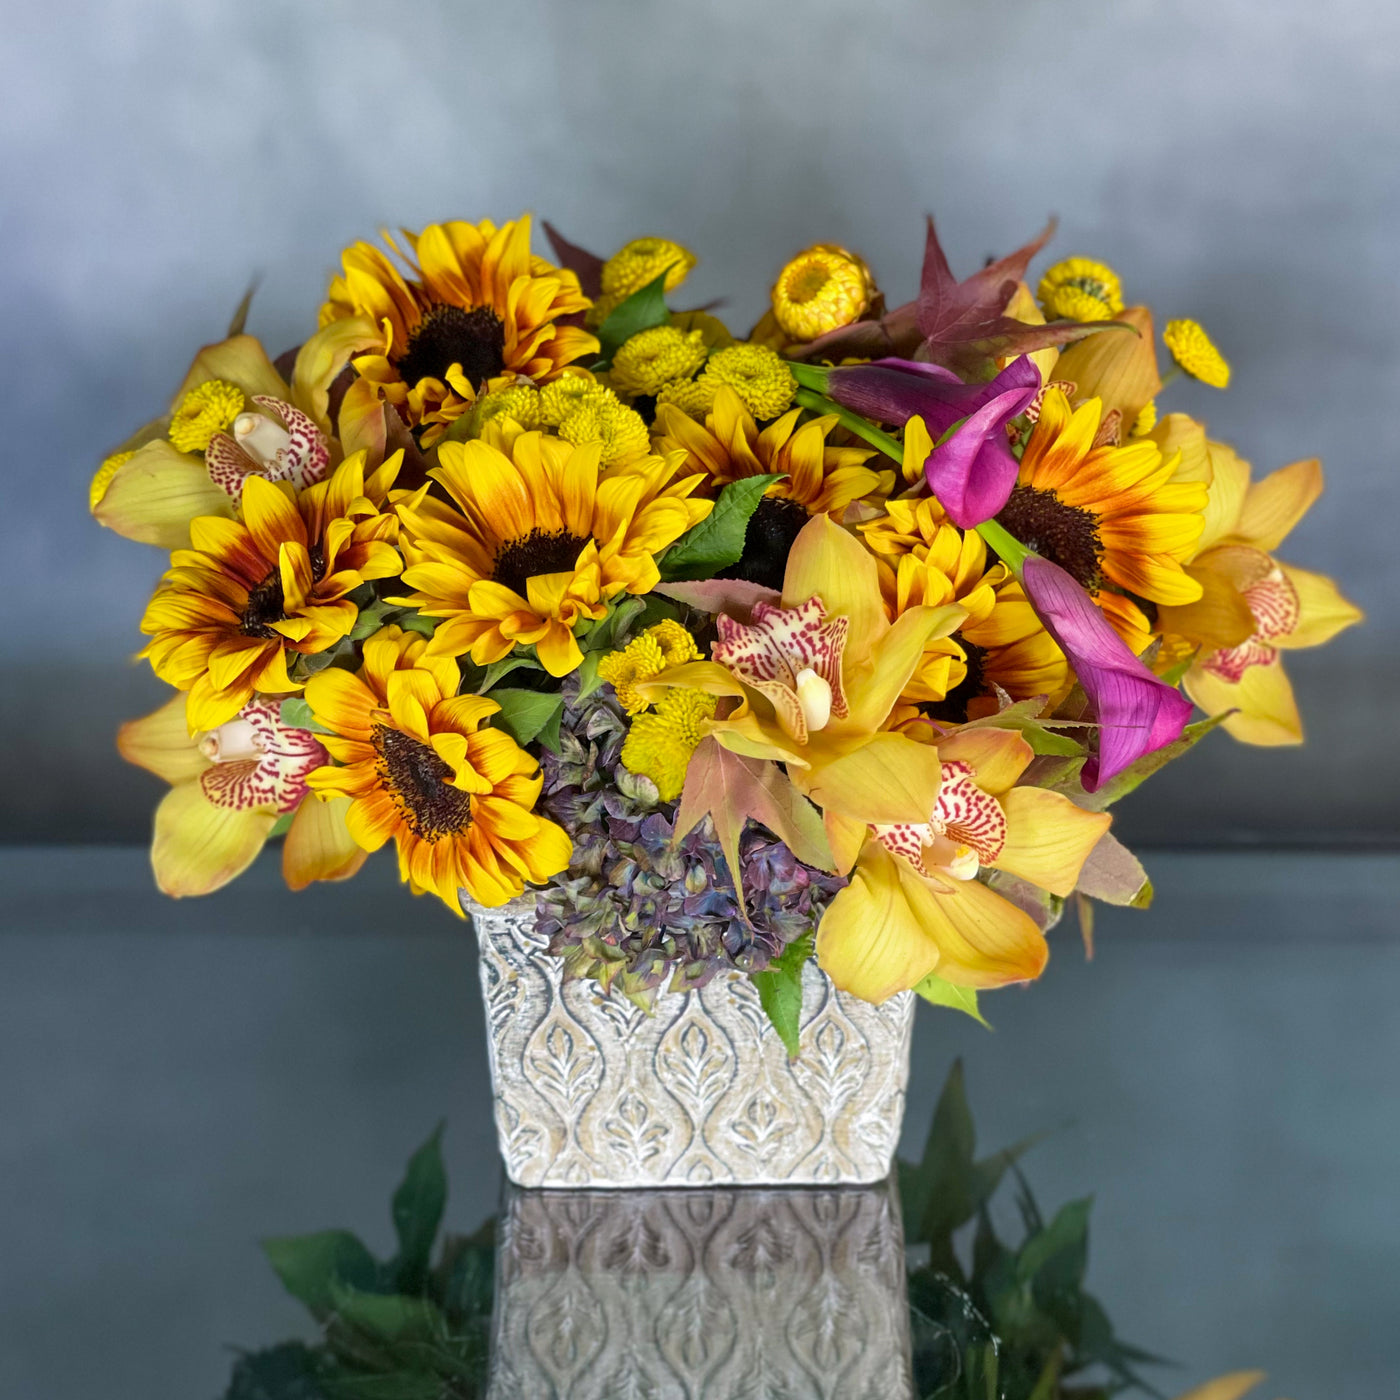 Our team presents Sunflowers hugged by antique Hydrangeas and locally grown flowers accented with imported Dutch Orchids and Call Lilies sit in a rustic 7" Square container. Beverly Hills Florist presents same day delivery ! Approx. 10" Round. Beautifully arranged for Birthdays and a touch of rustic beauty for your home. Birthday, Thank you flowers, Office, Home flowers. 